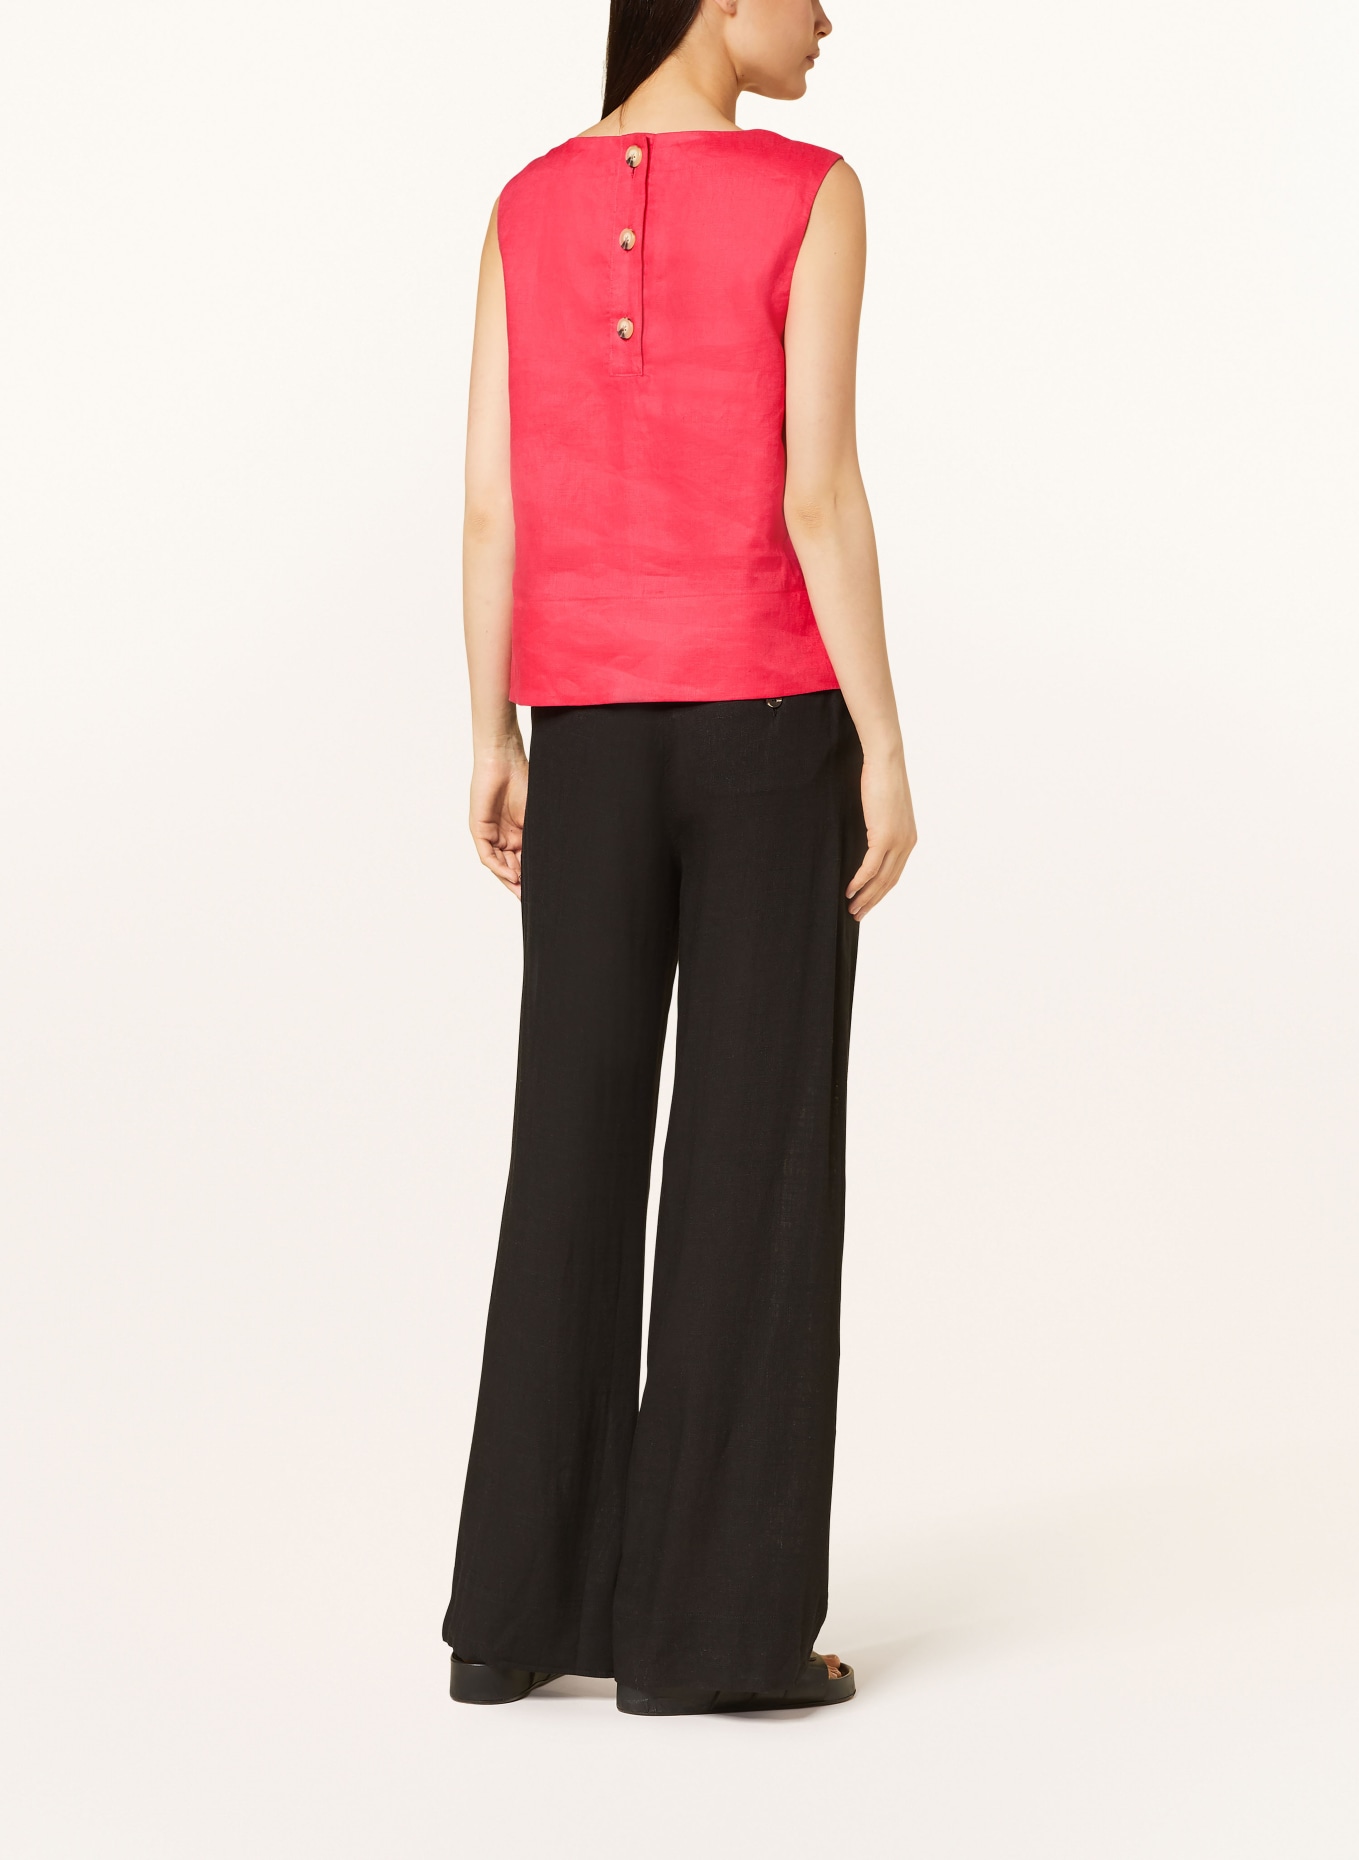 HOBBS Blouse top MALINDI in linen, Color: PINK (Image 3)